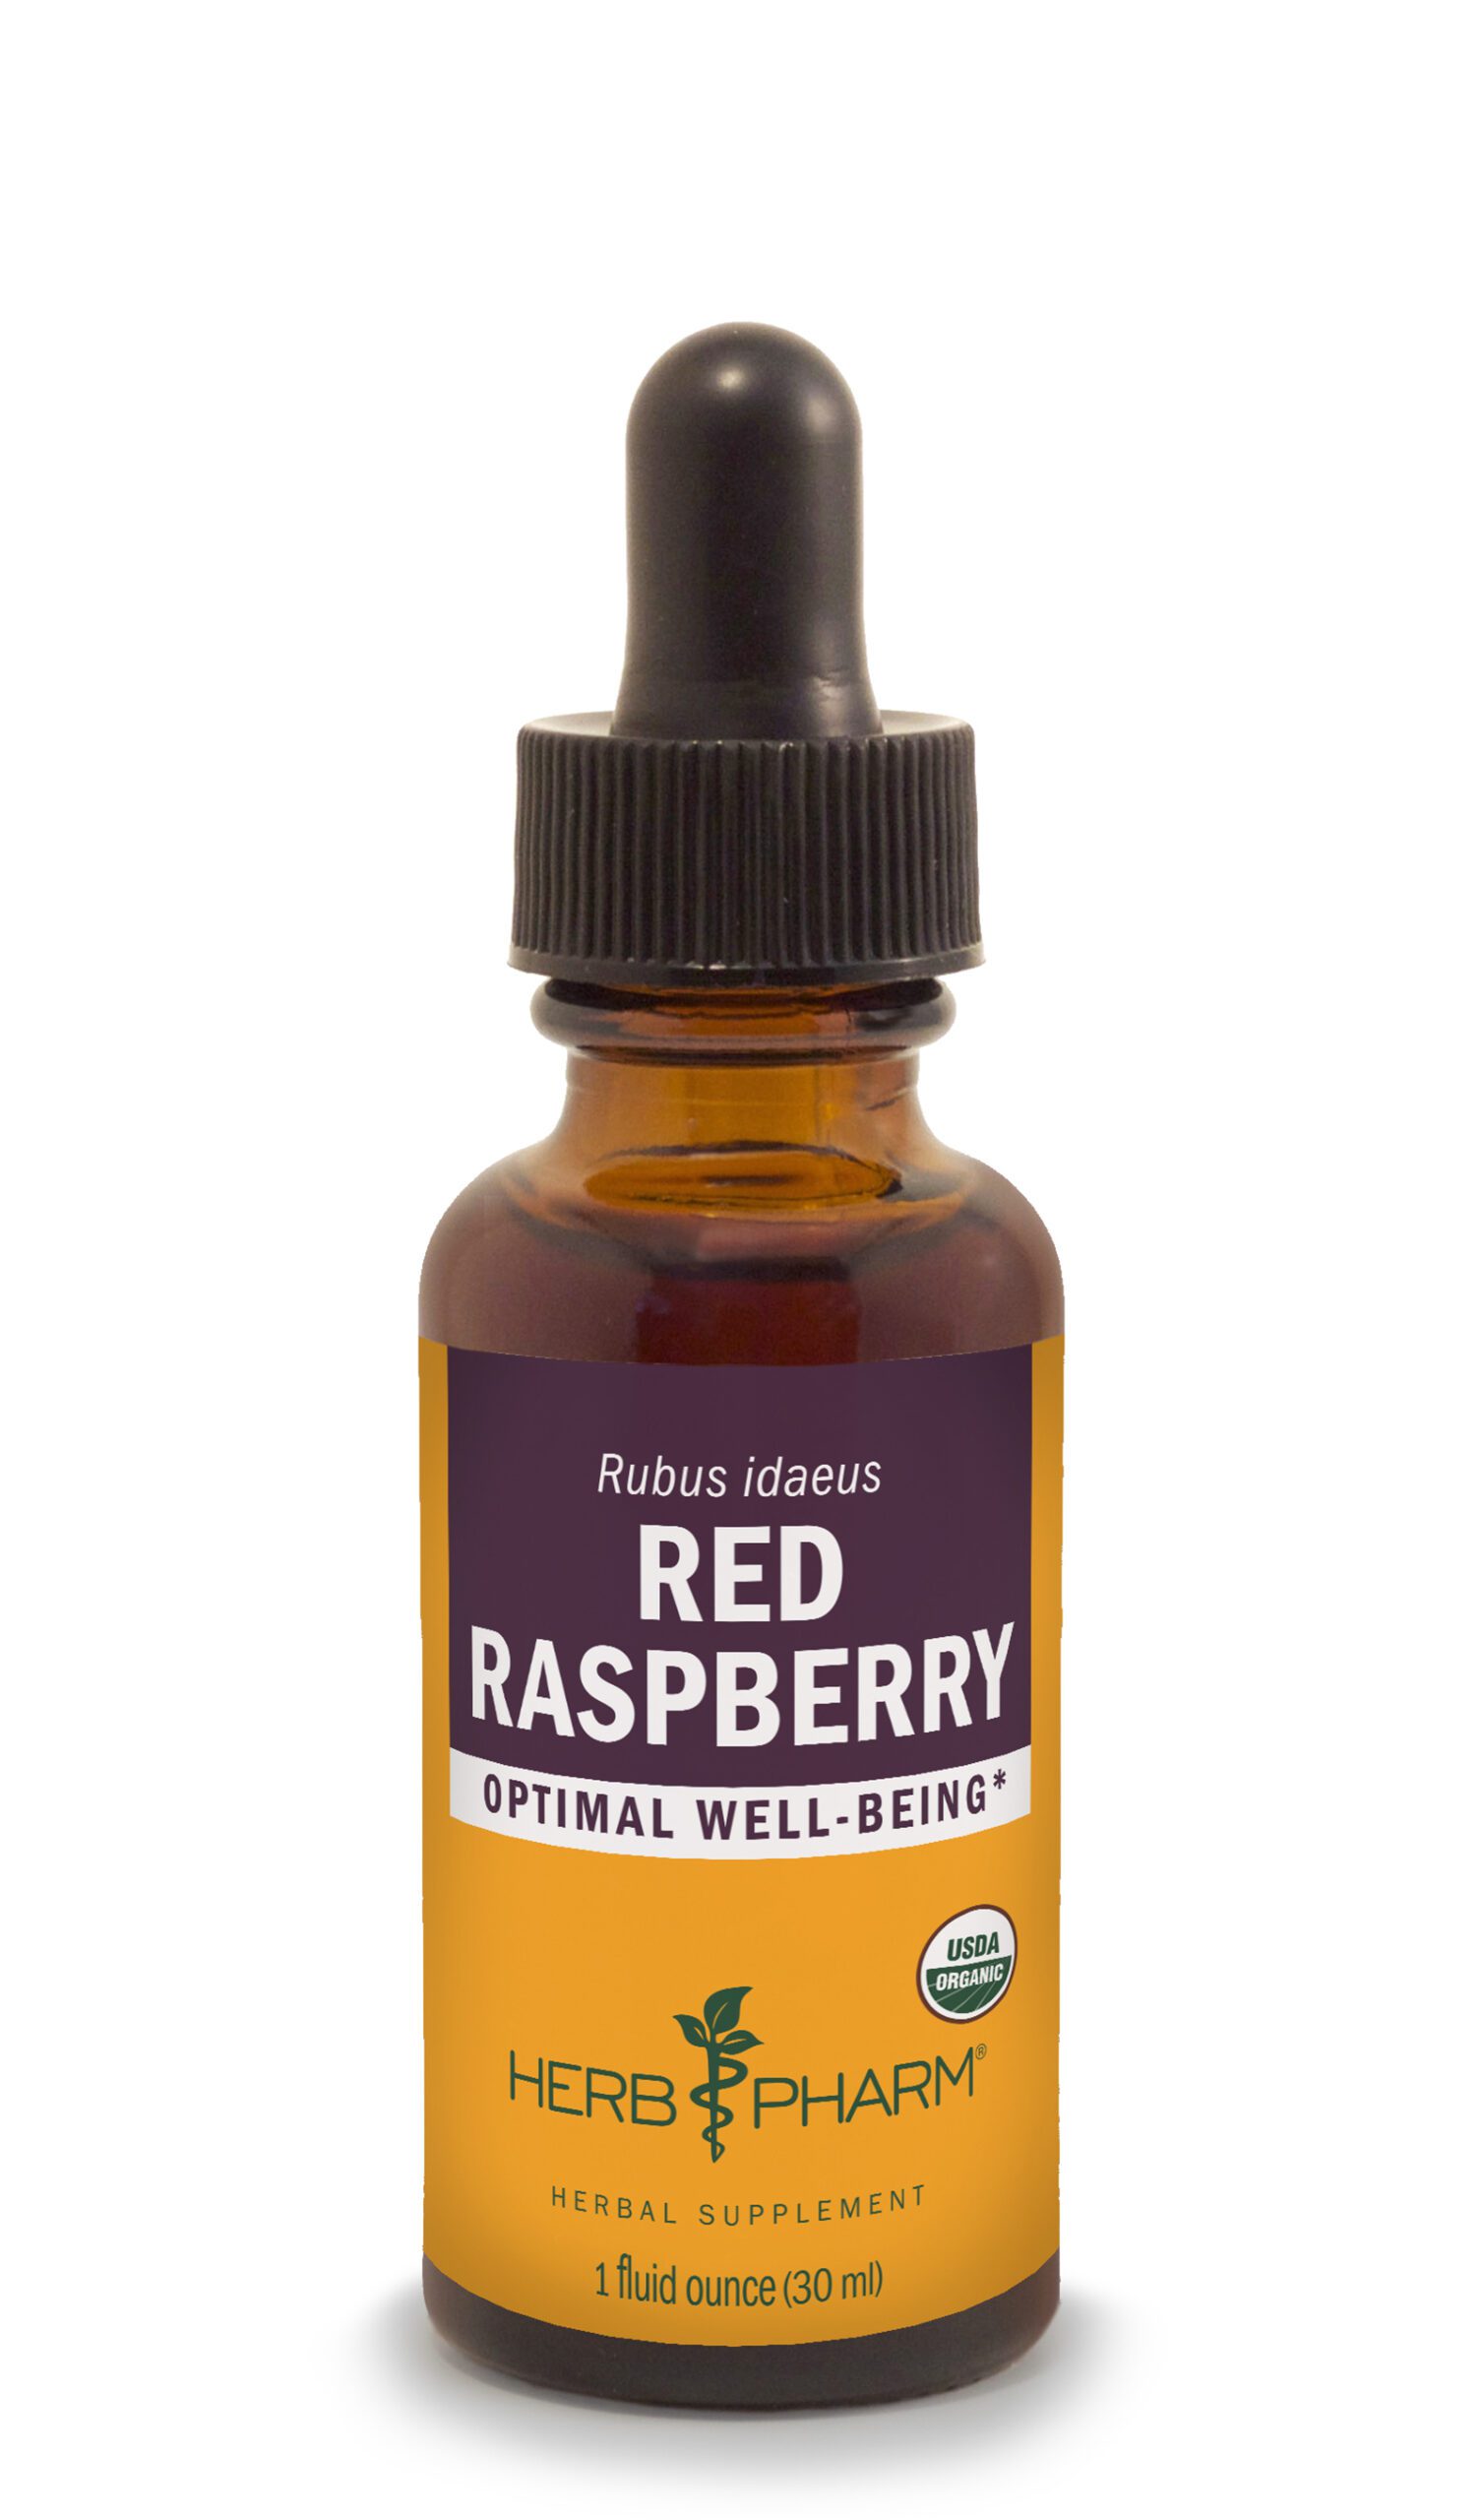 Product Listing Image for Herb Pharm Red Raspberry Tincture 1oz